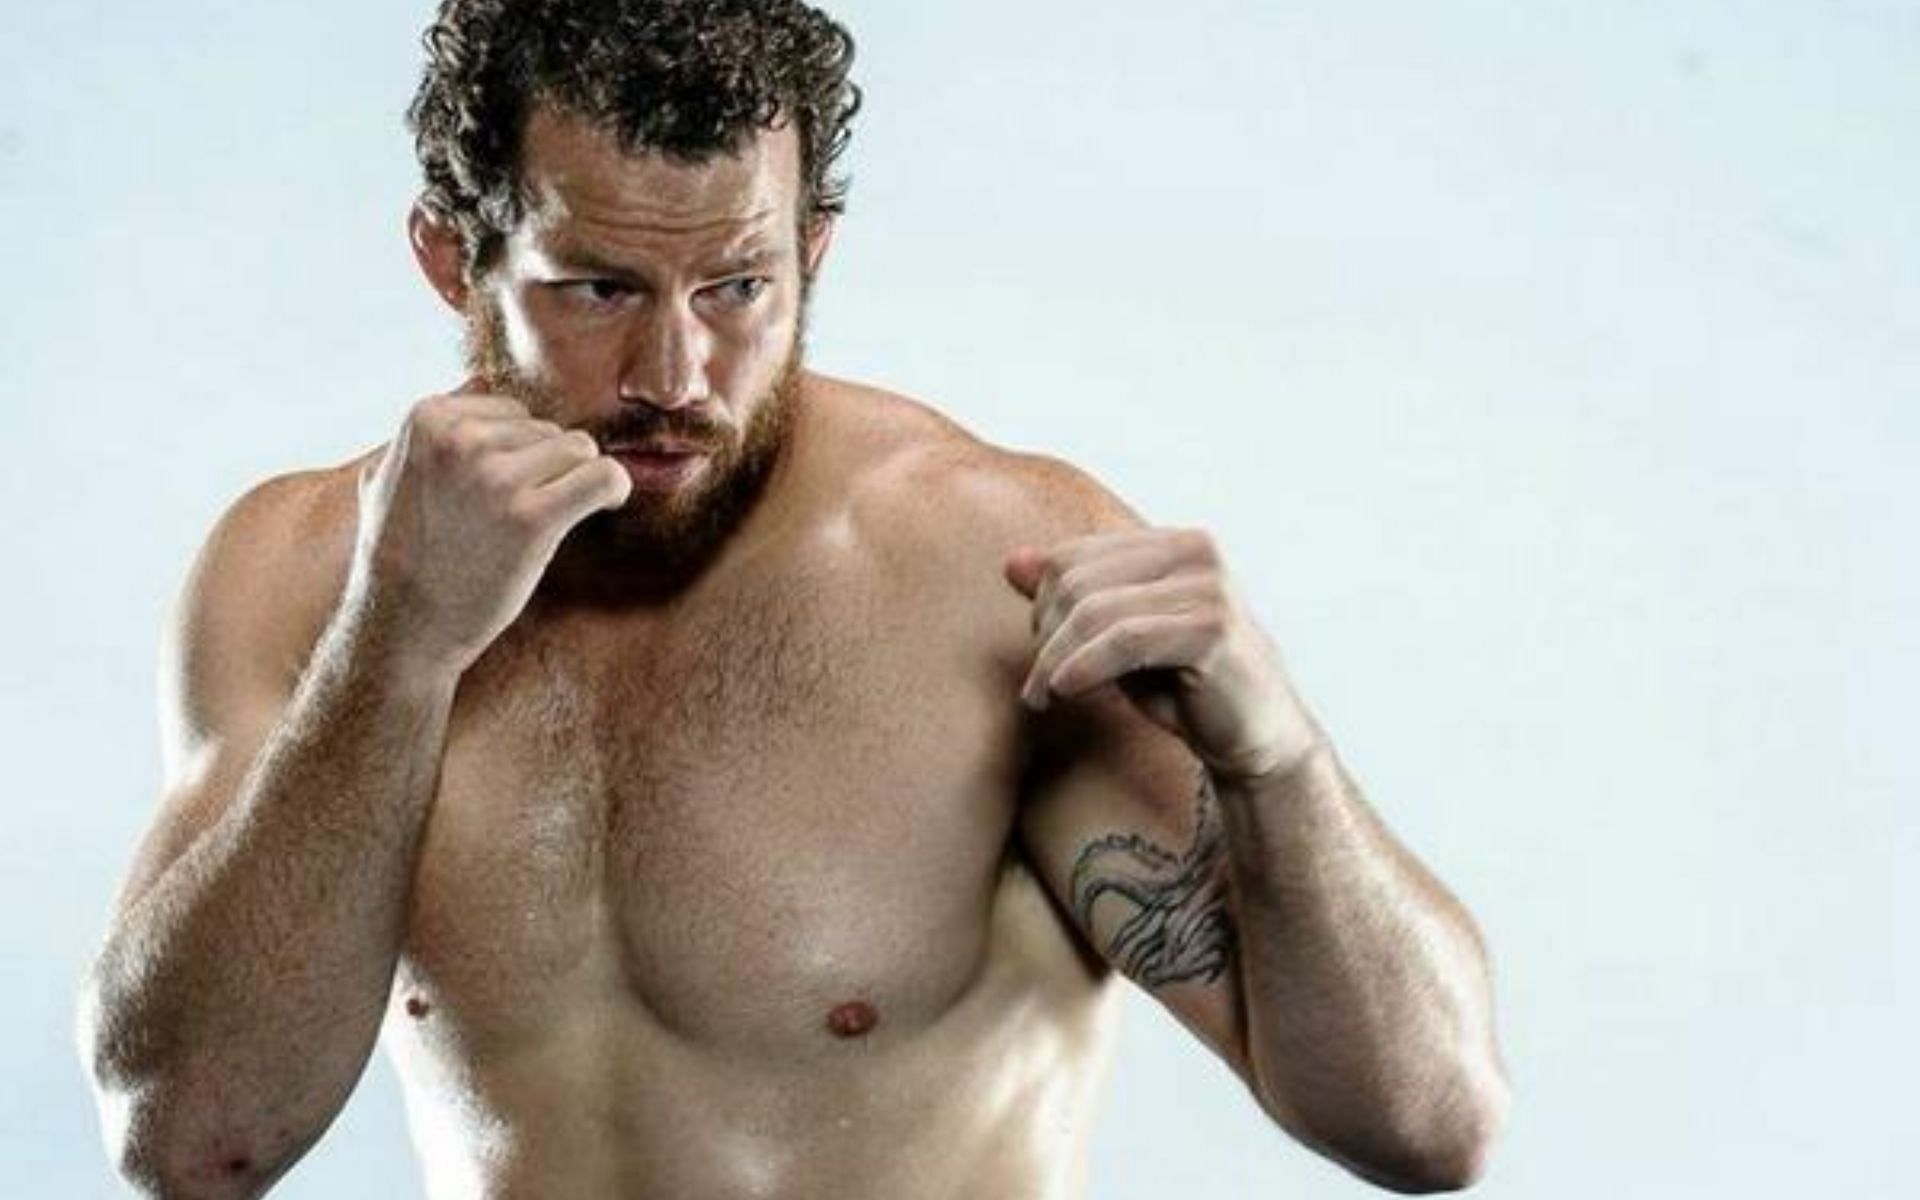 Nate Marquardt inadvertently torpedoed his own UFC career in 2011